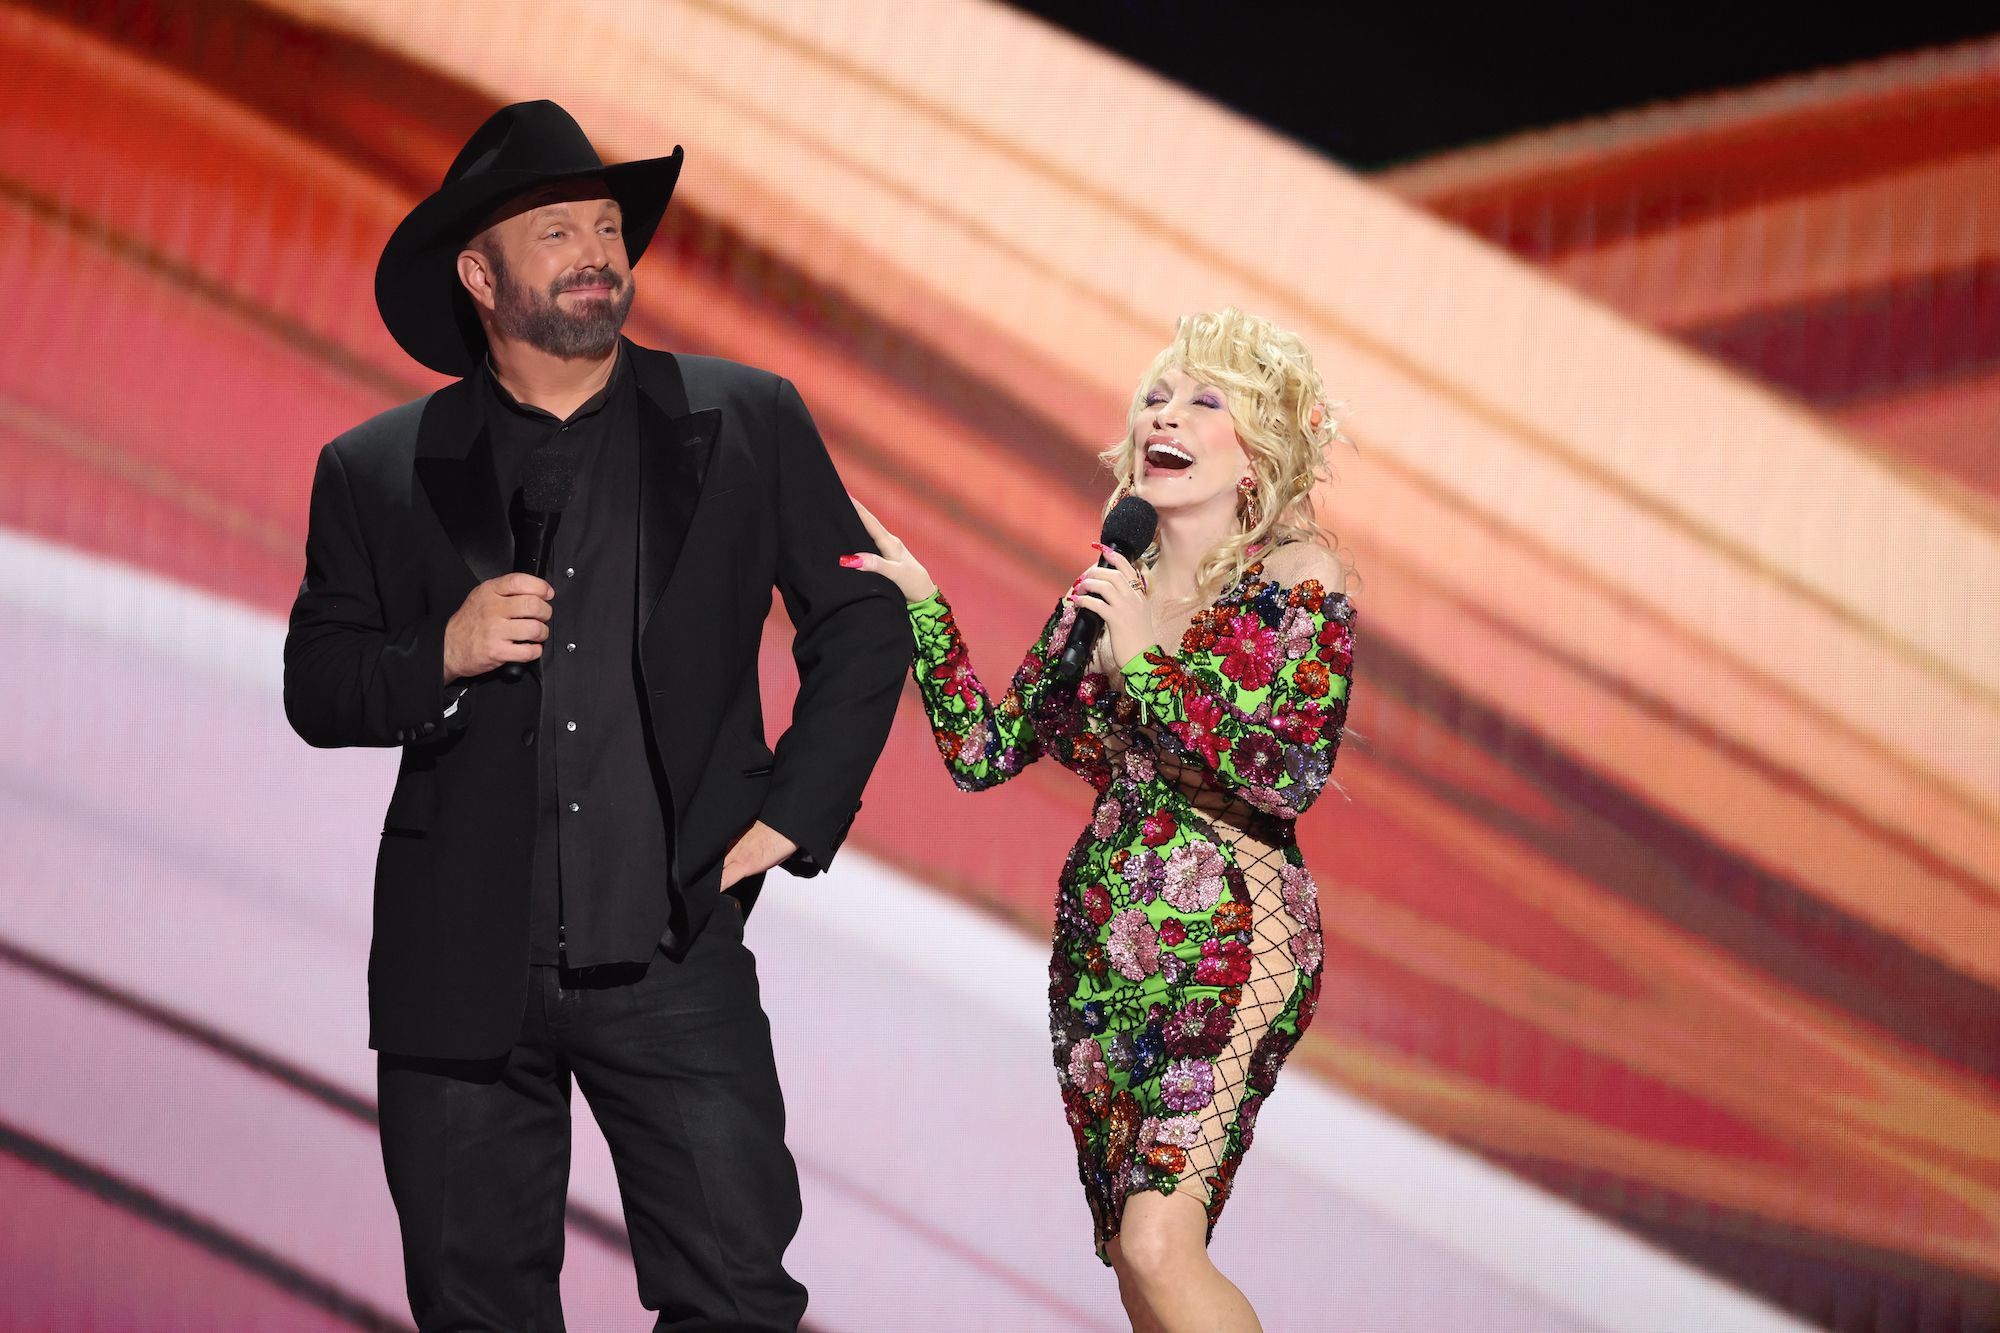 How to Watch and Stream the 2023 ACM Awards